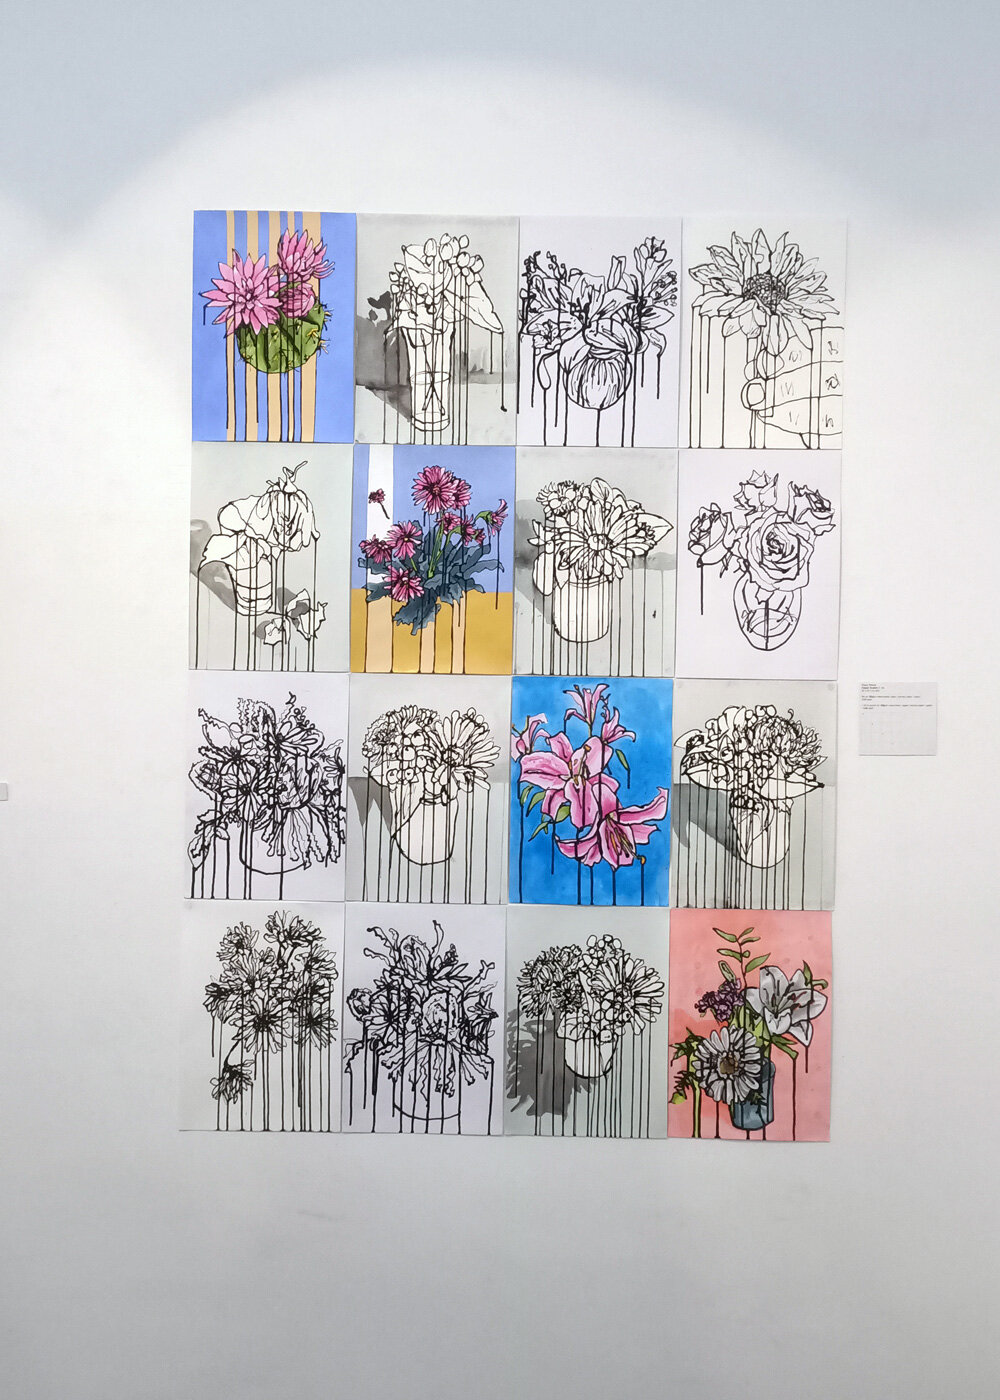   Flower Studies 1 -16 , Ink on 300gsm watercolour paper (various paper types), 42 x 29.7 cm (A3)  